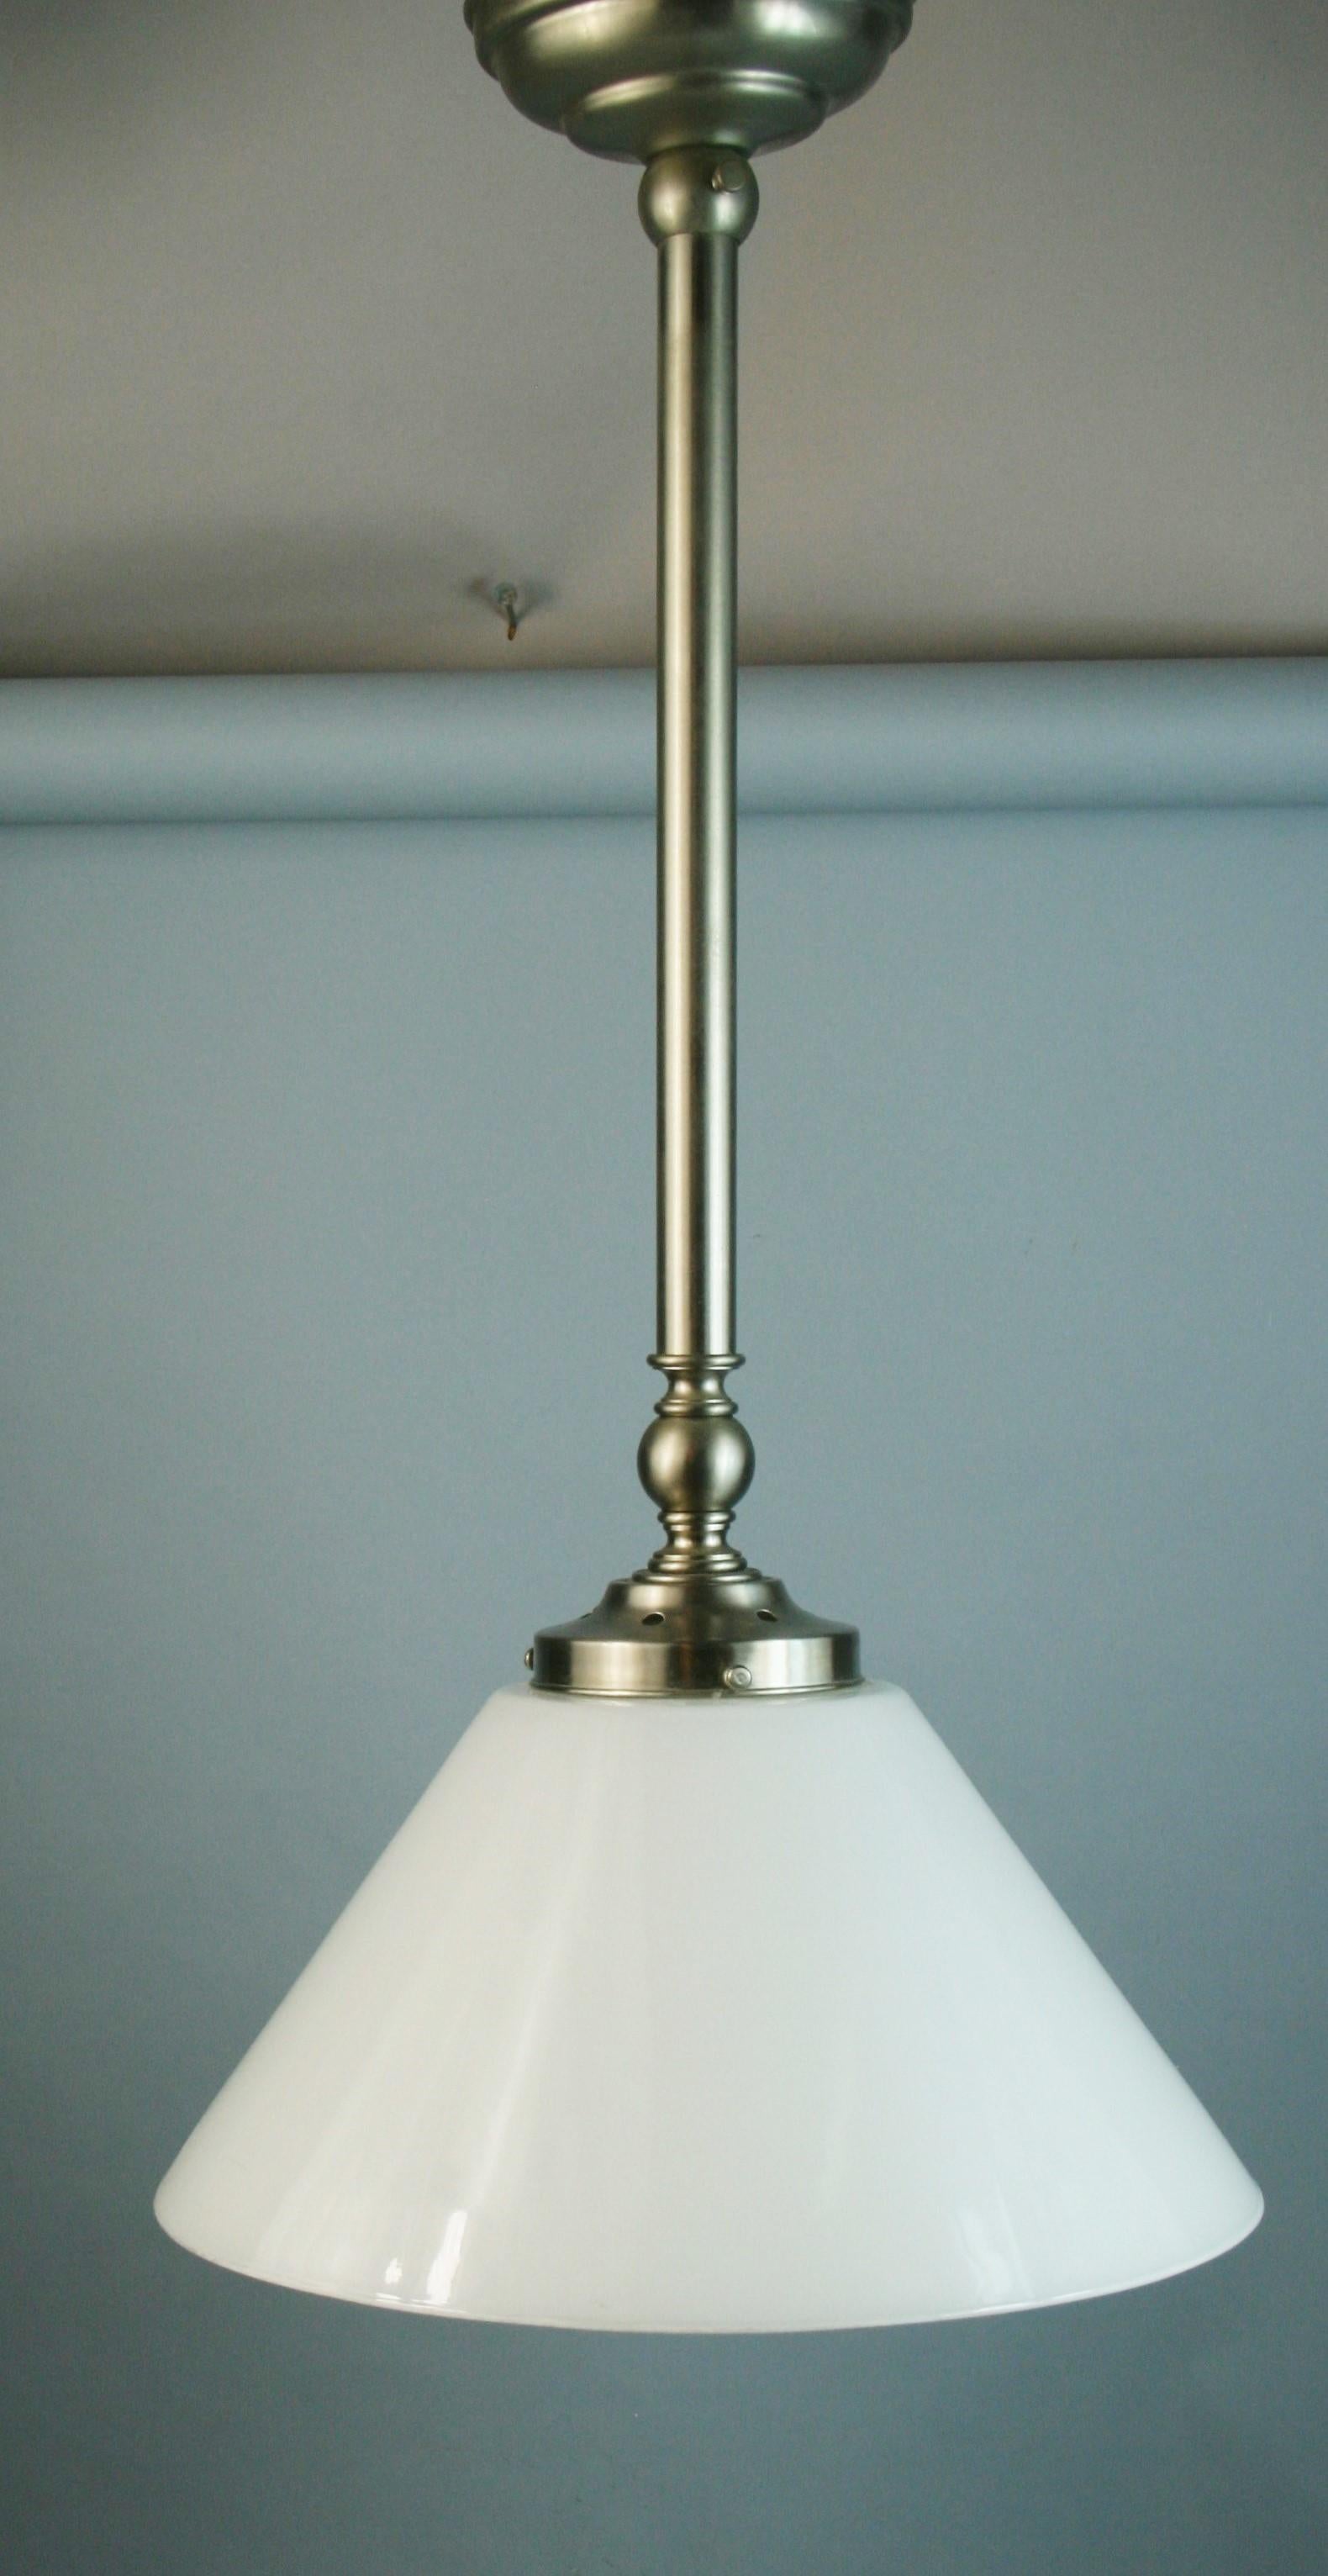 1547 Danish brushed nickel milk glass cone pendant with removable glass bottom
Rewired takes 2 Edison based bulbs 60 watt max
2 pendants available priced individually